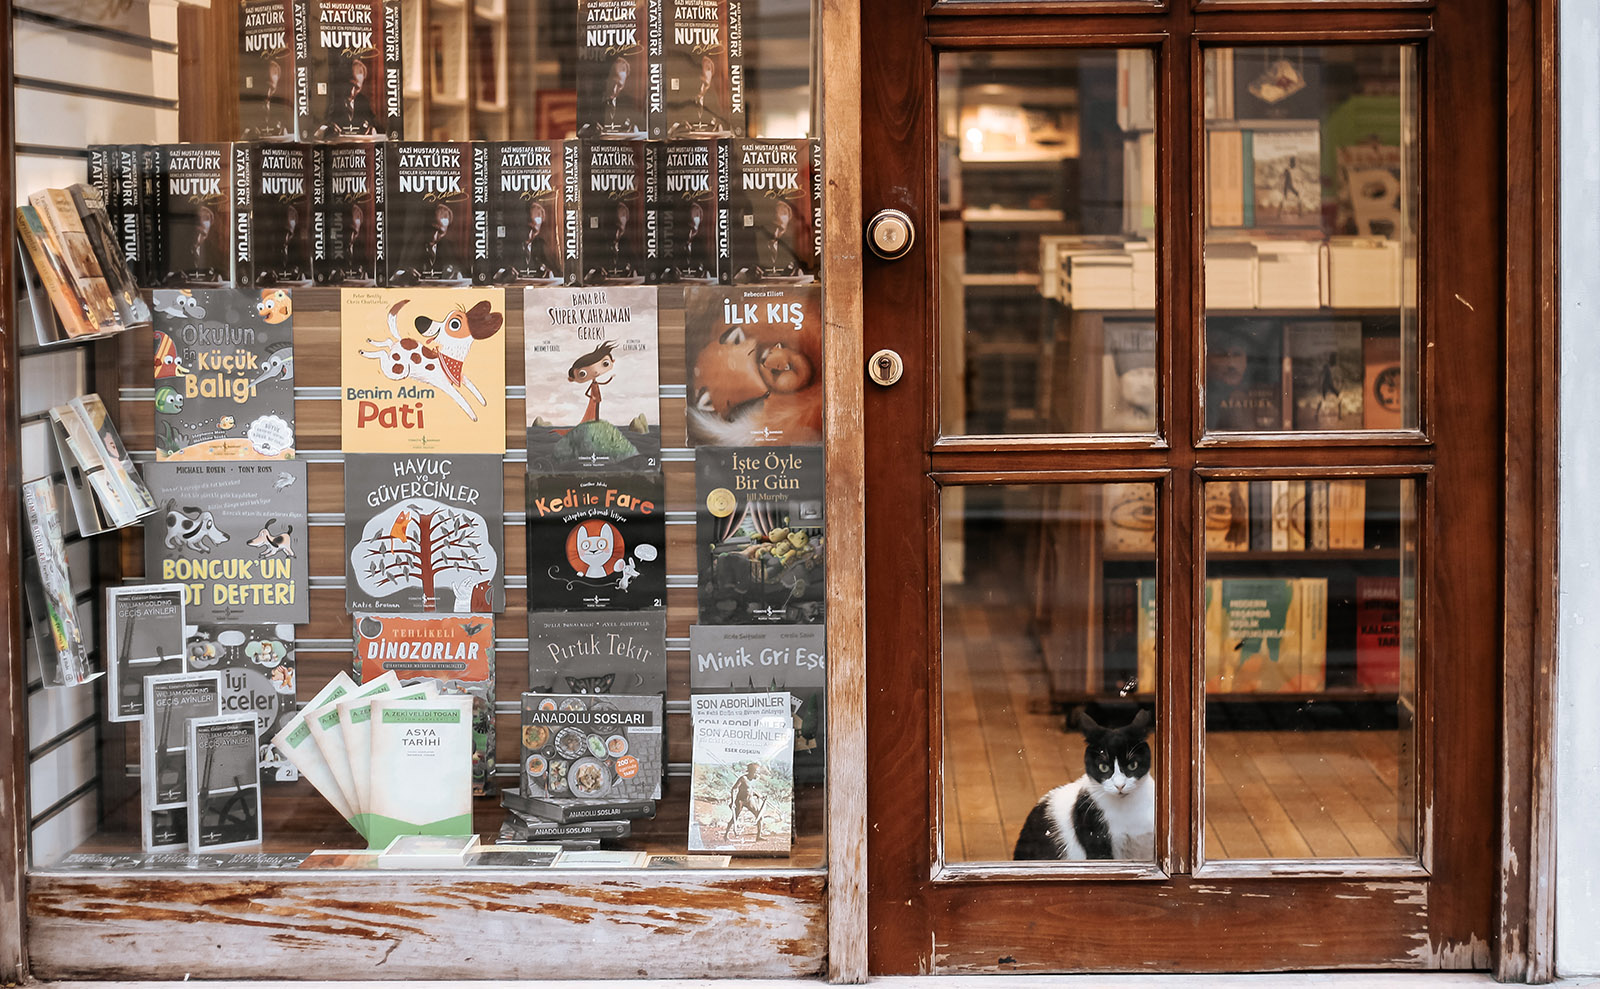 the window of a bookshop with children's books on display and a white cat sittin in the doorway